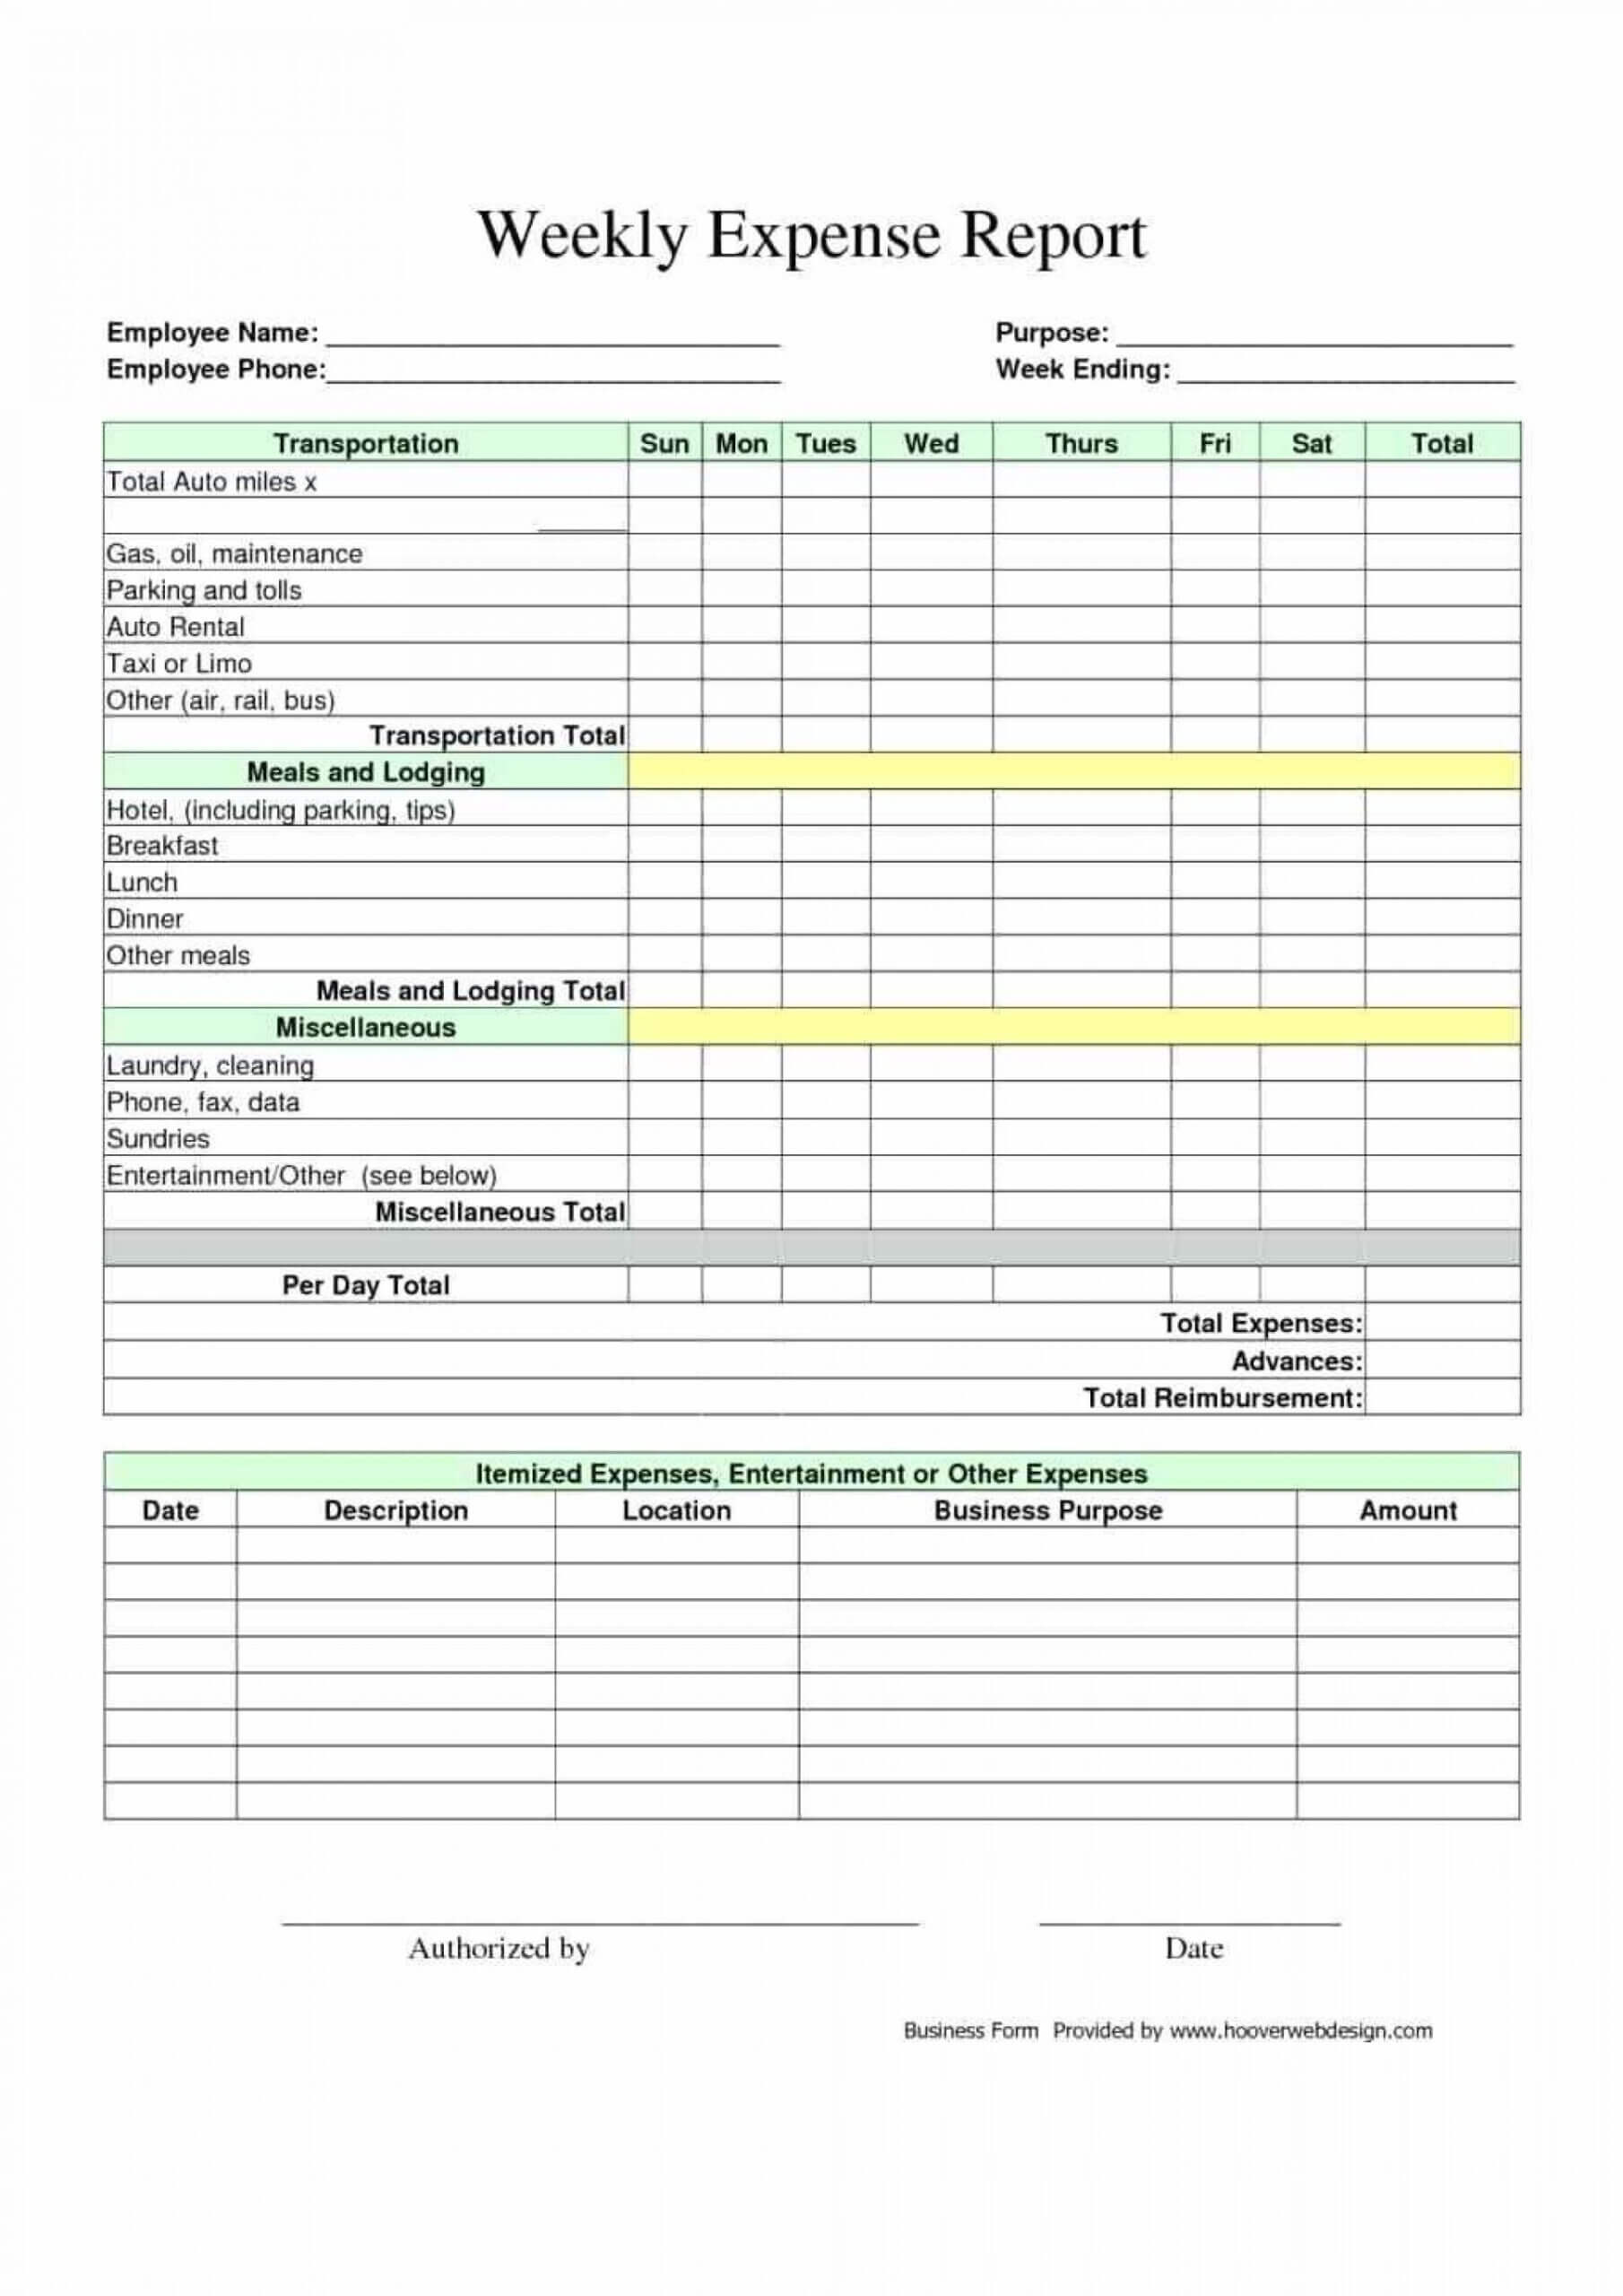 024 How To Account For Employee Expenses Free Expense Report In Gas Mileage Expense Report Template